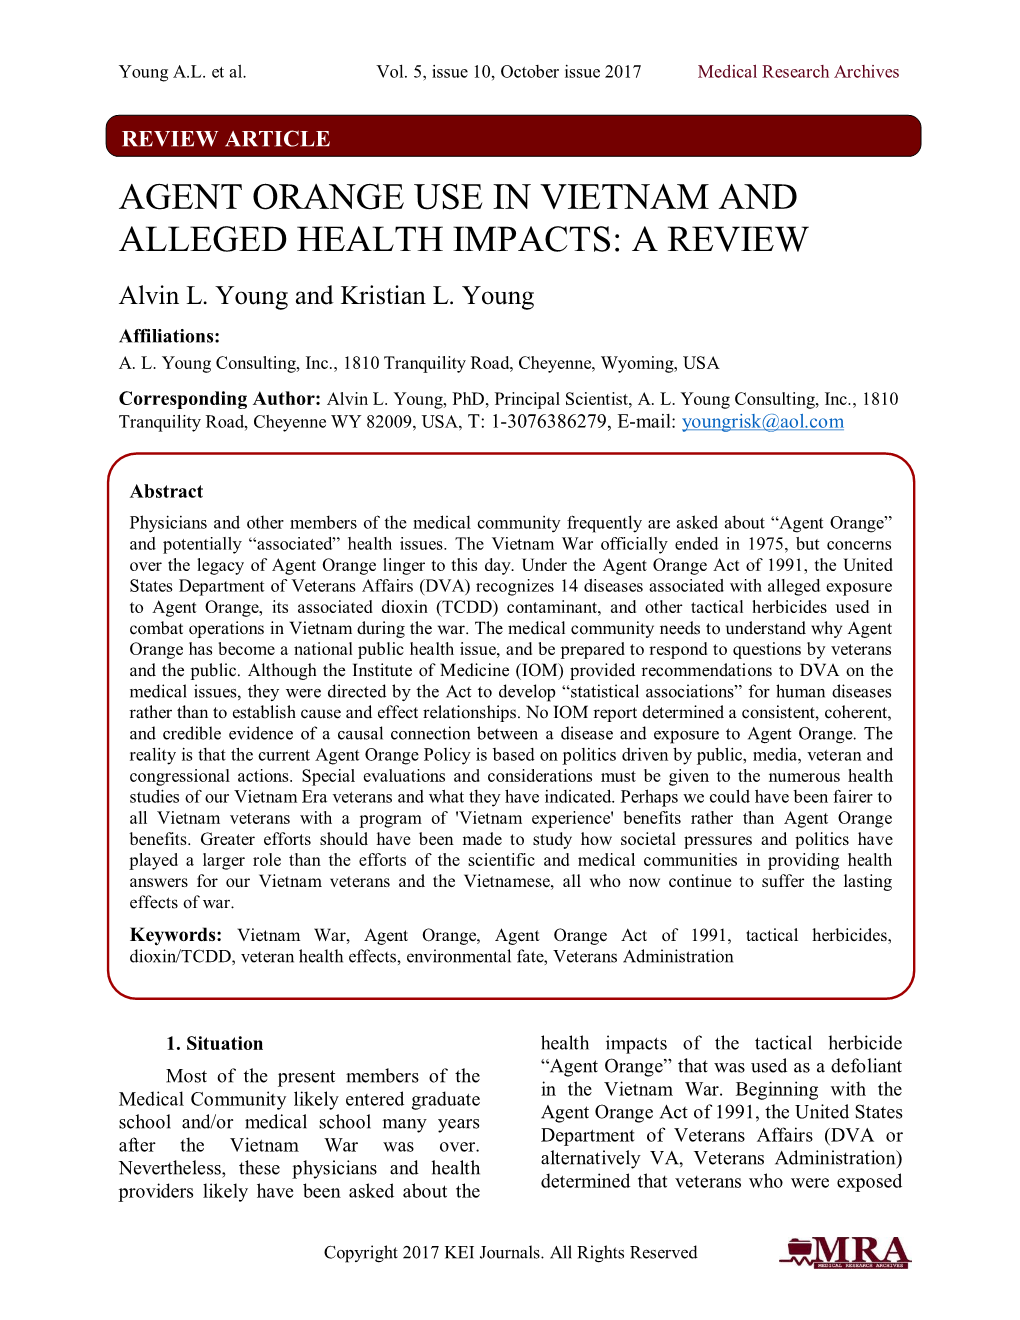 AGENT ORANGE USE in VIETNAM and ALLEGED HEALTH IMPACTS: a REVIEW Alvin L